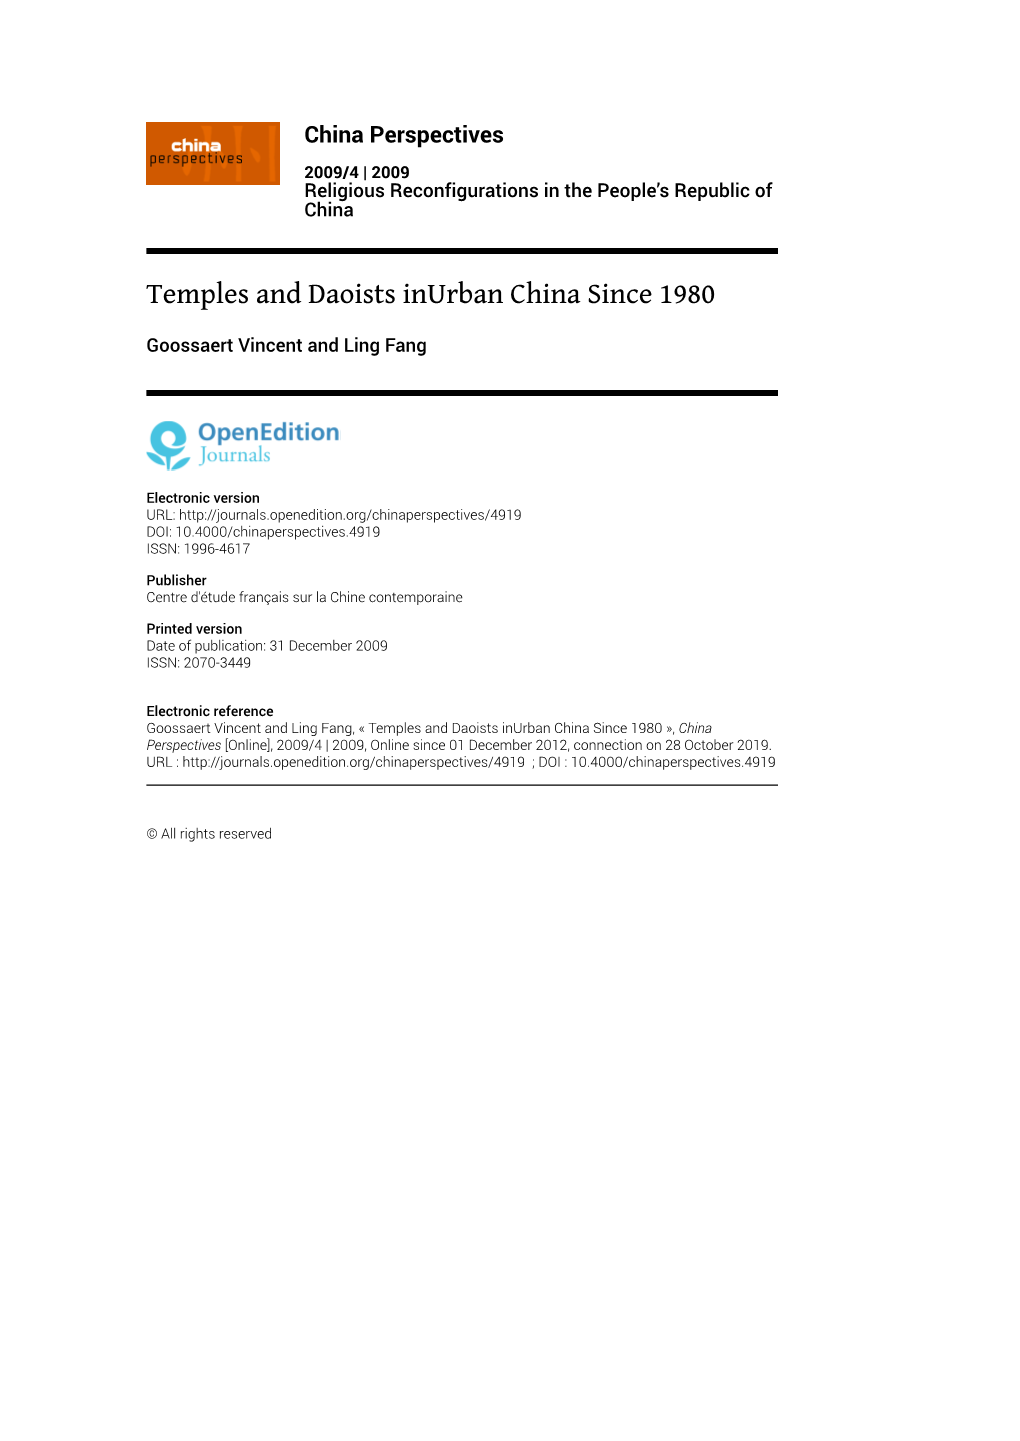 Temples and Daoists Inurban China Since 1980